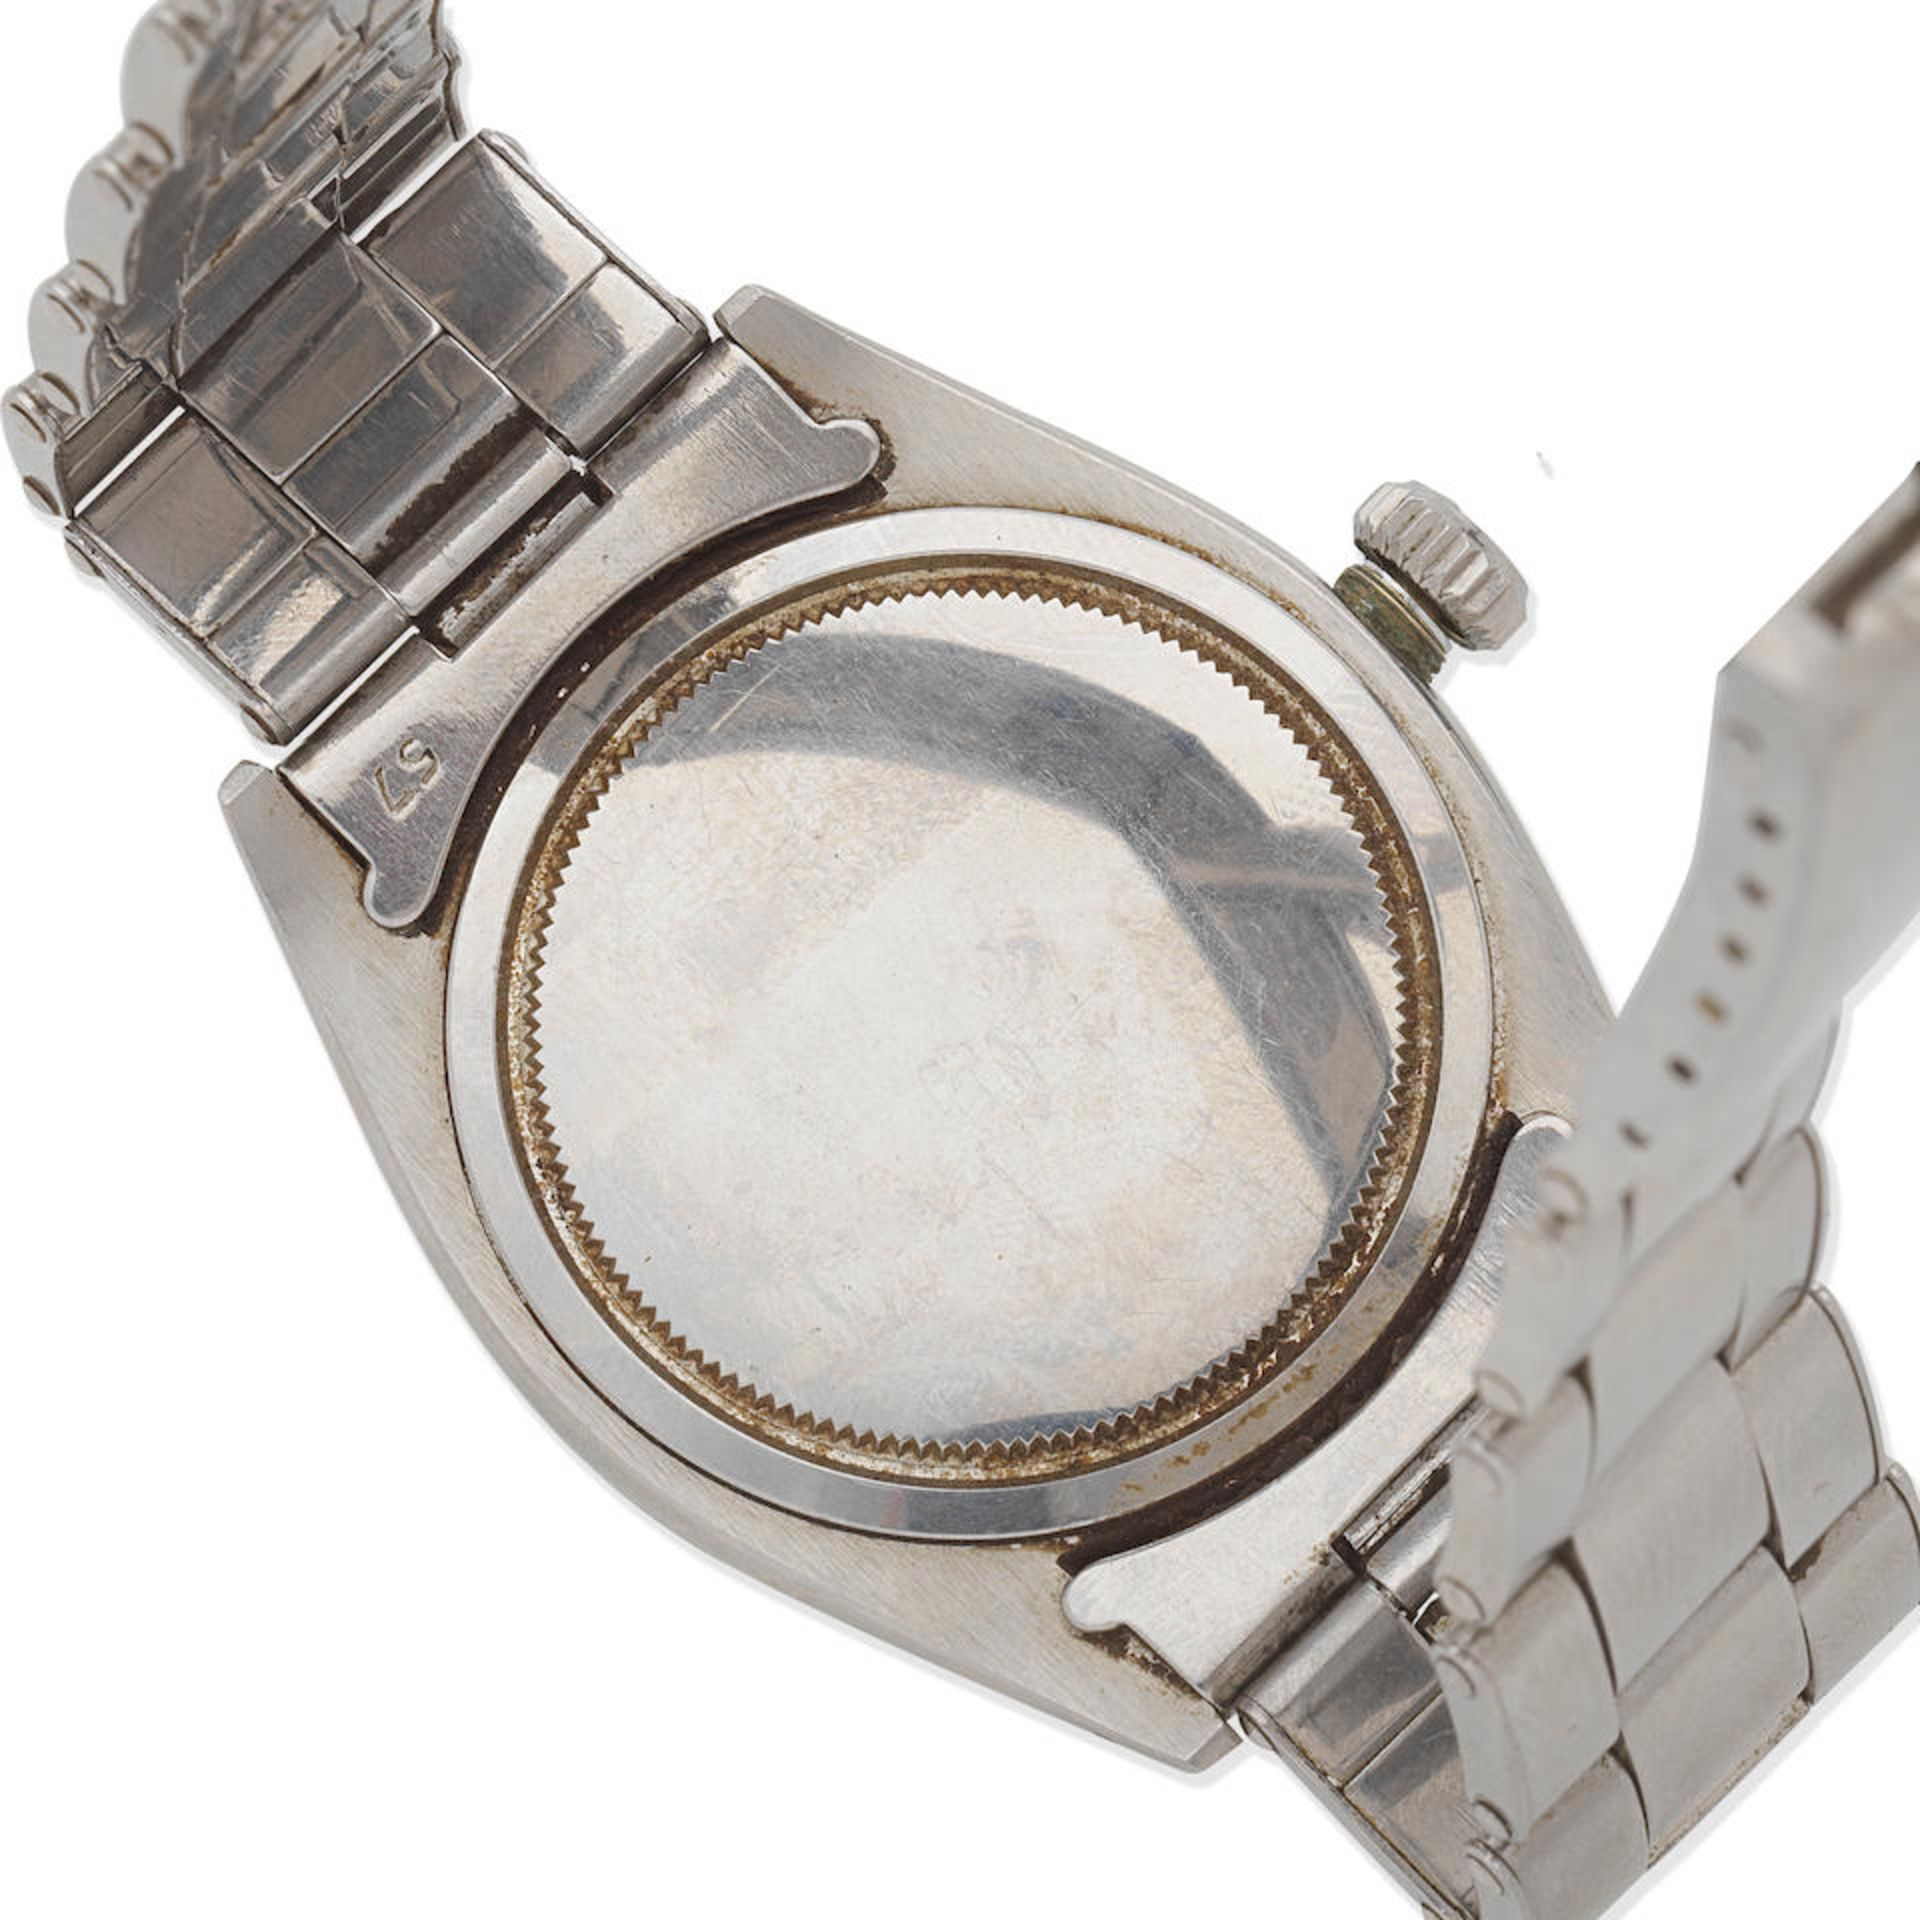 Rolex. A stainless steel manual wind bracelet watch Oyster Royal, Ref: 6426/6427, Circa 1961 - Image 2 of 5